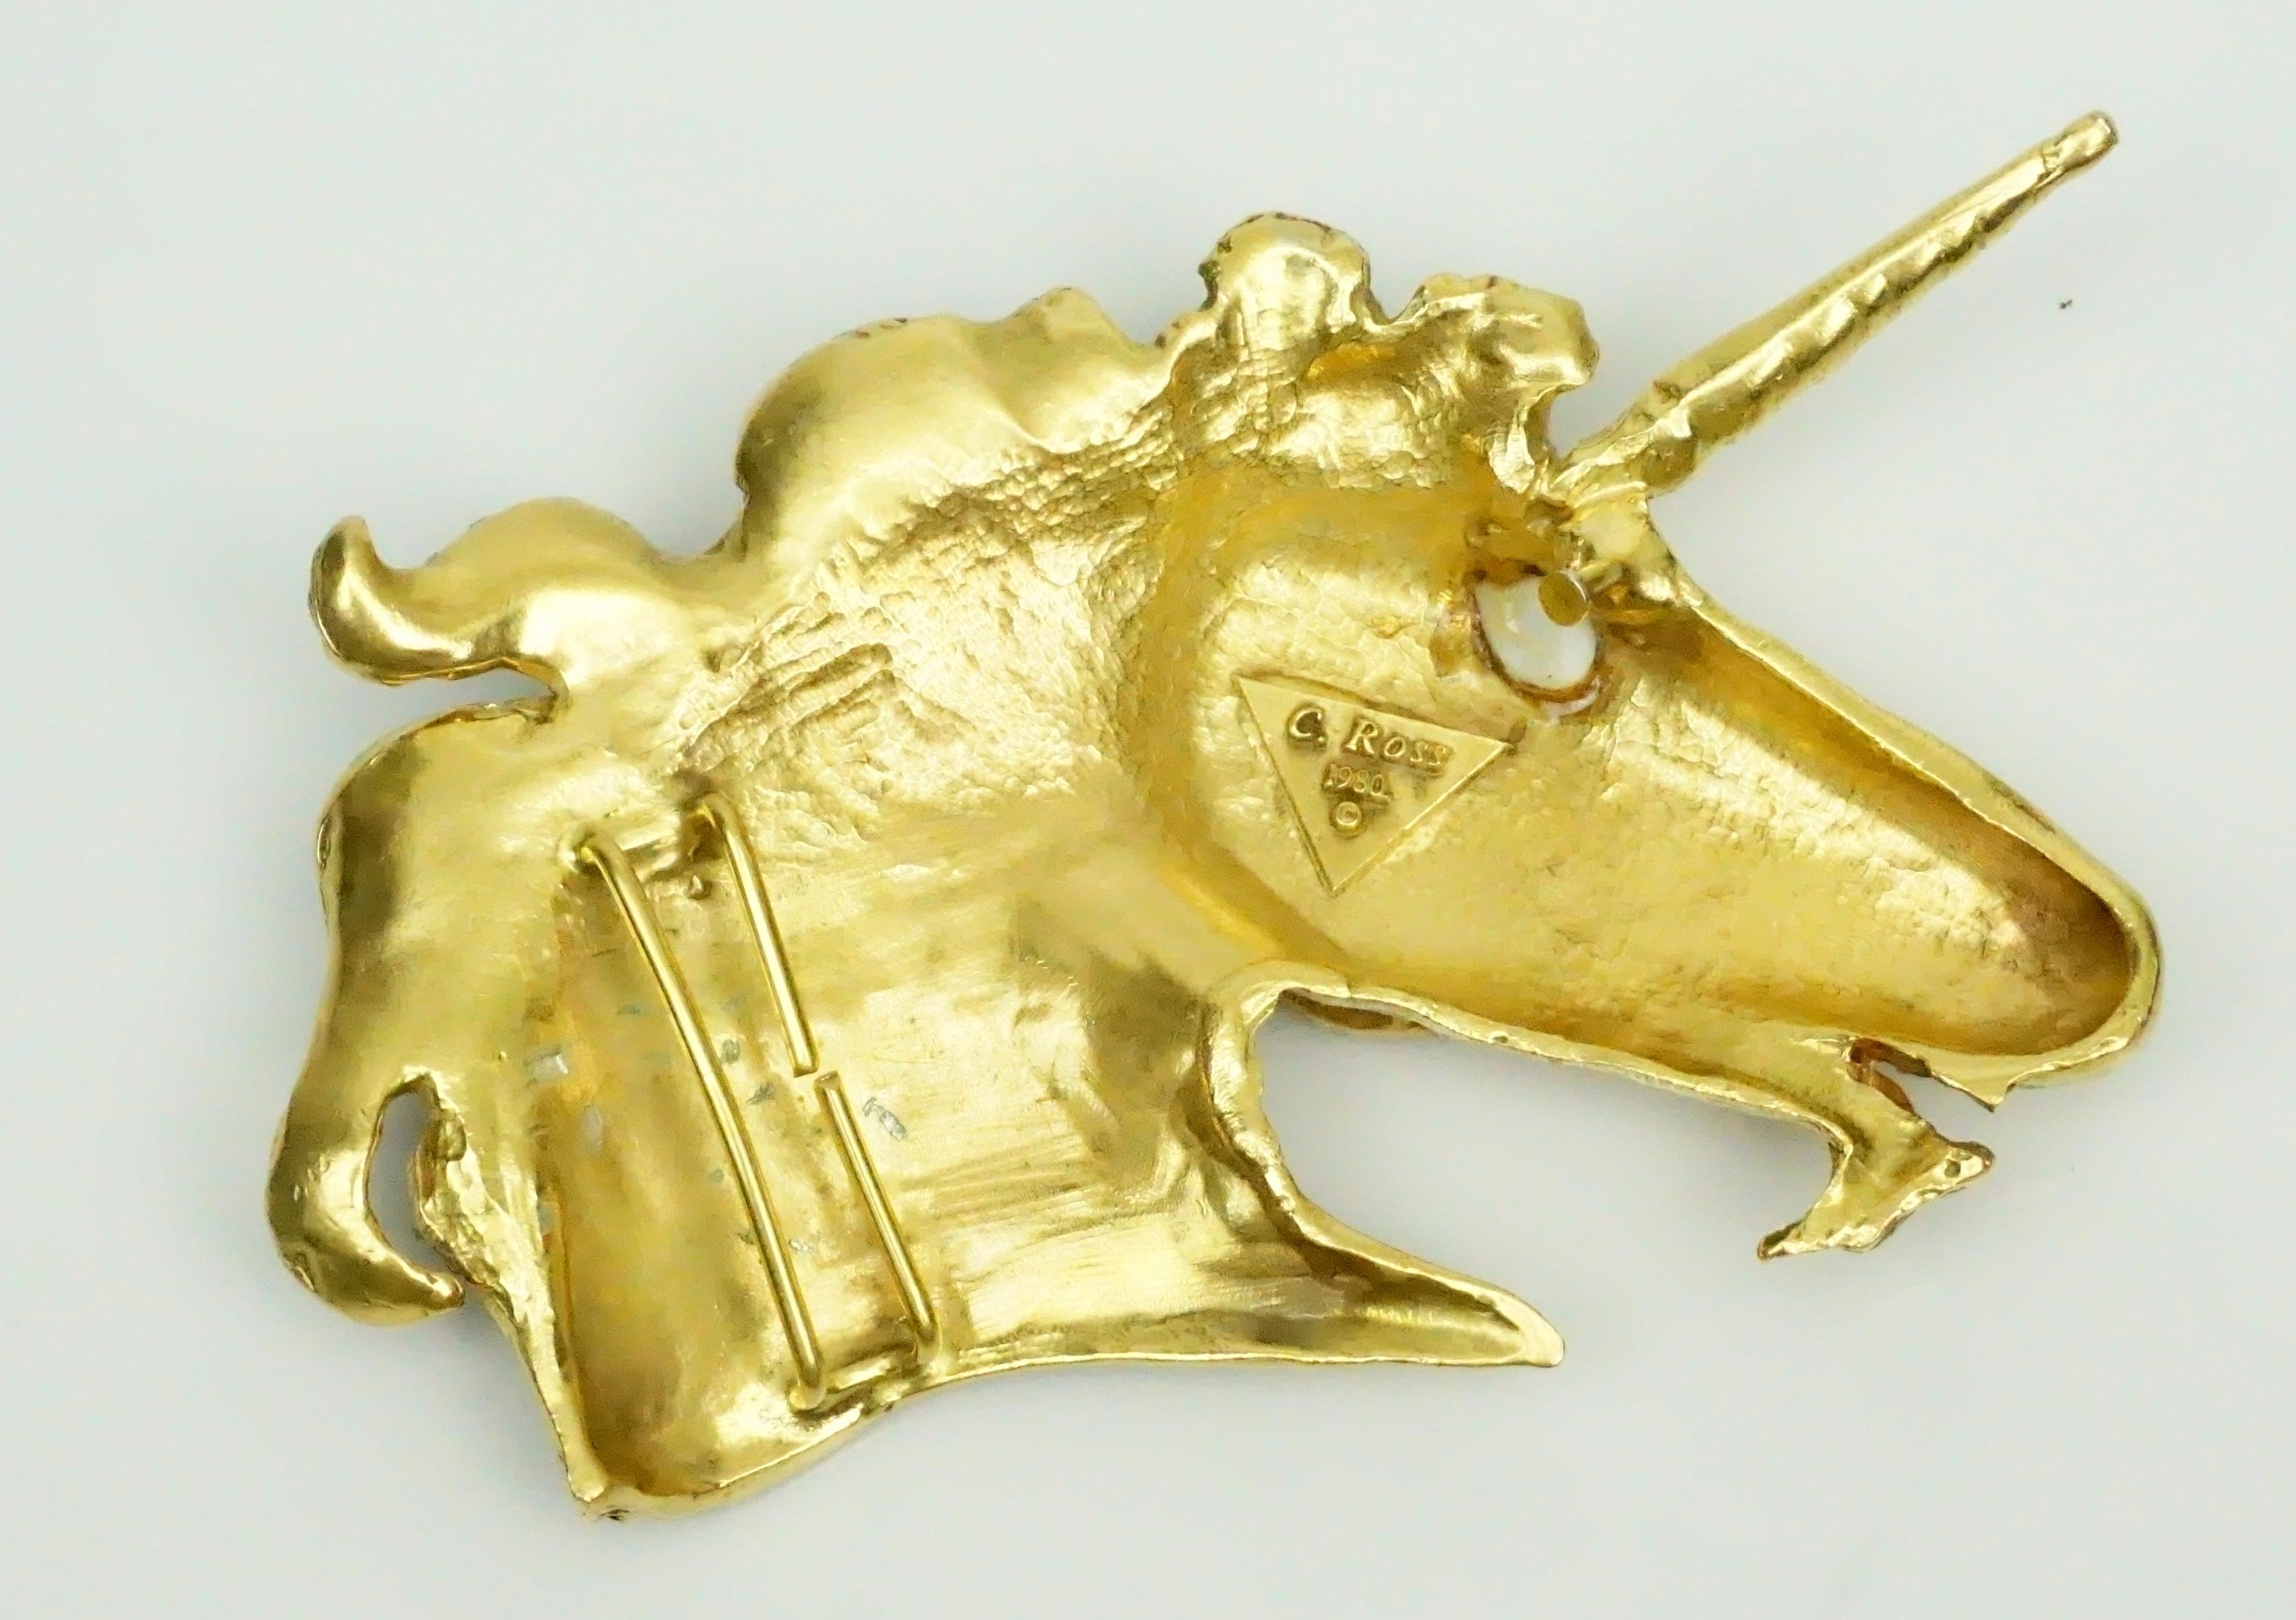 Christopher Ross Gold Unicorn Head Belt Buckle - Circa 1980  This very collectible buckle is in excellent vintage condition.
Measurements 
Height: 3